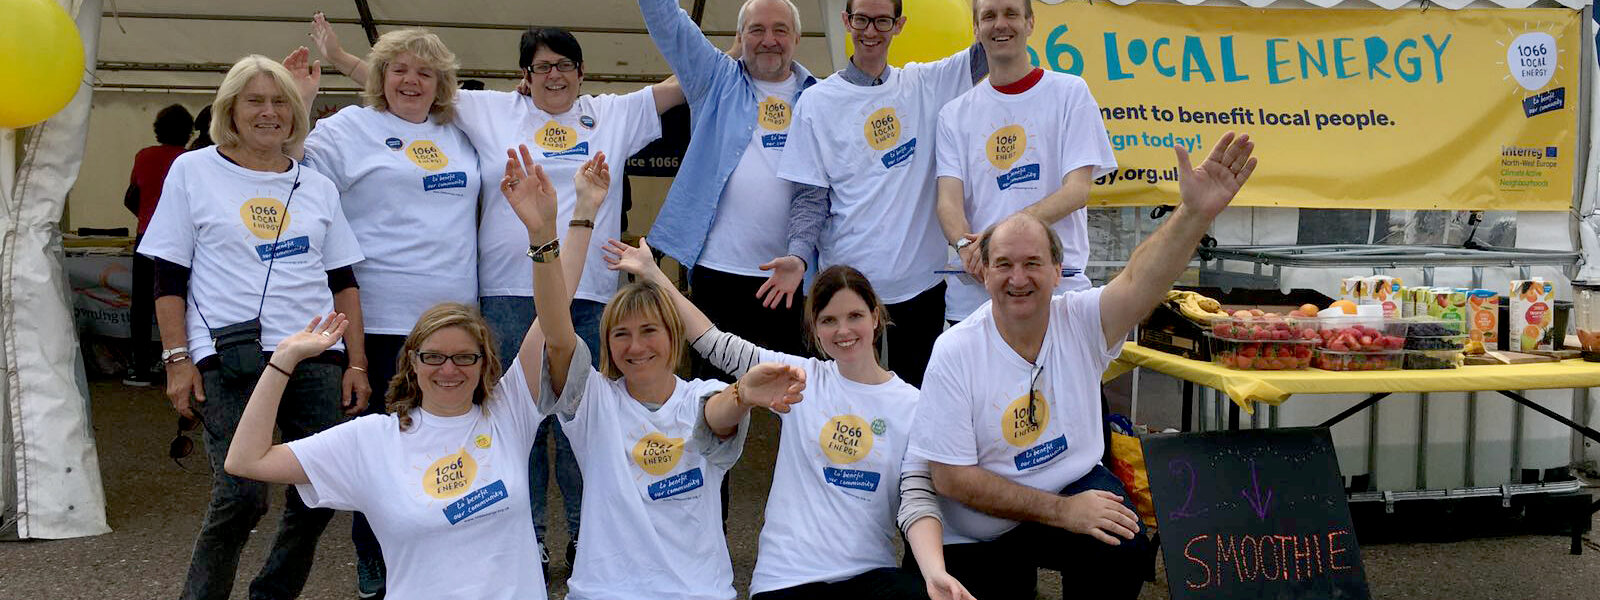 Team in 1066 Local Energy t-shirts